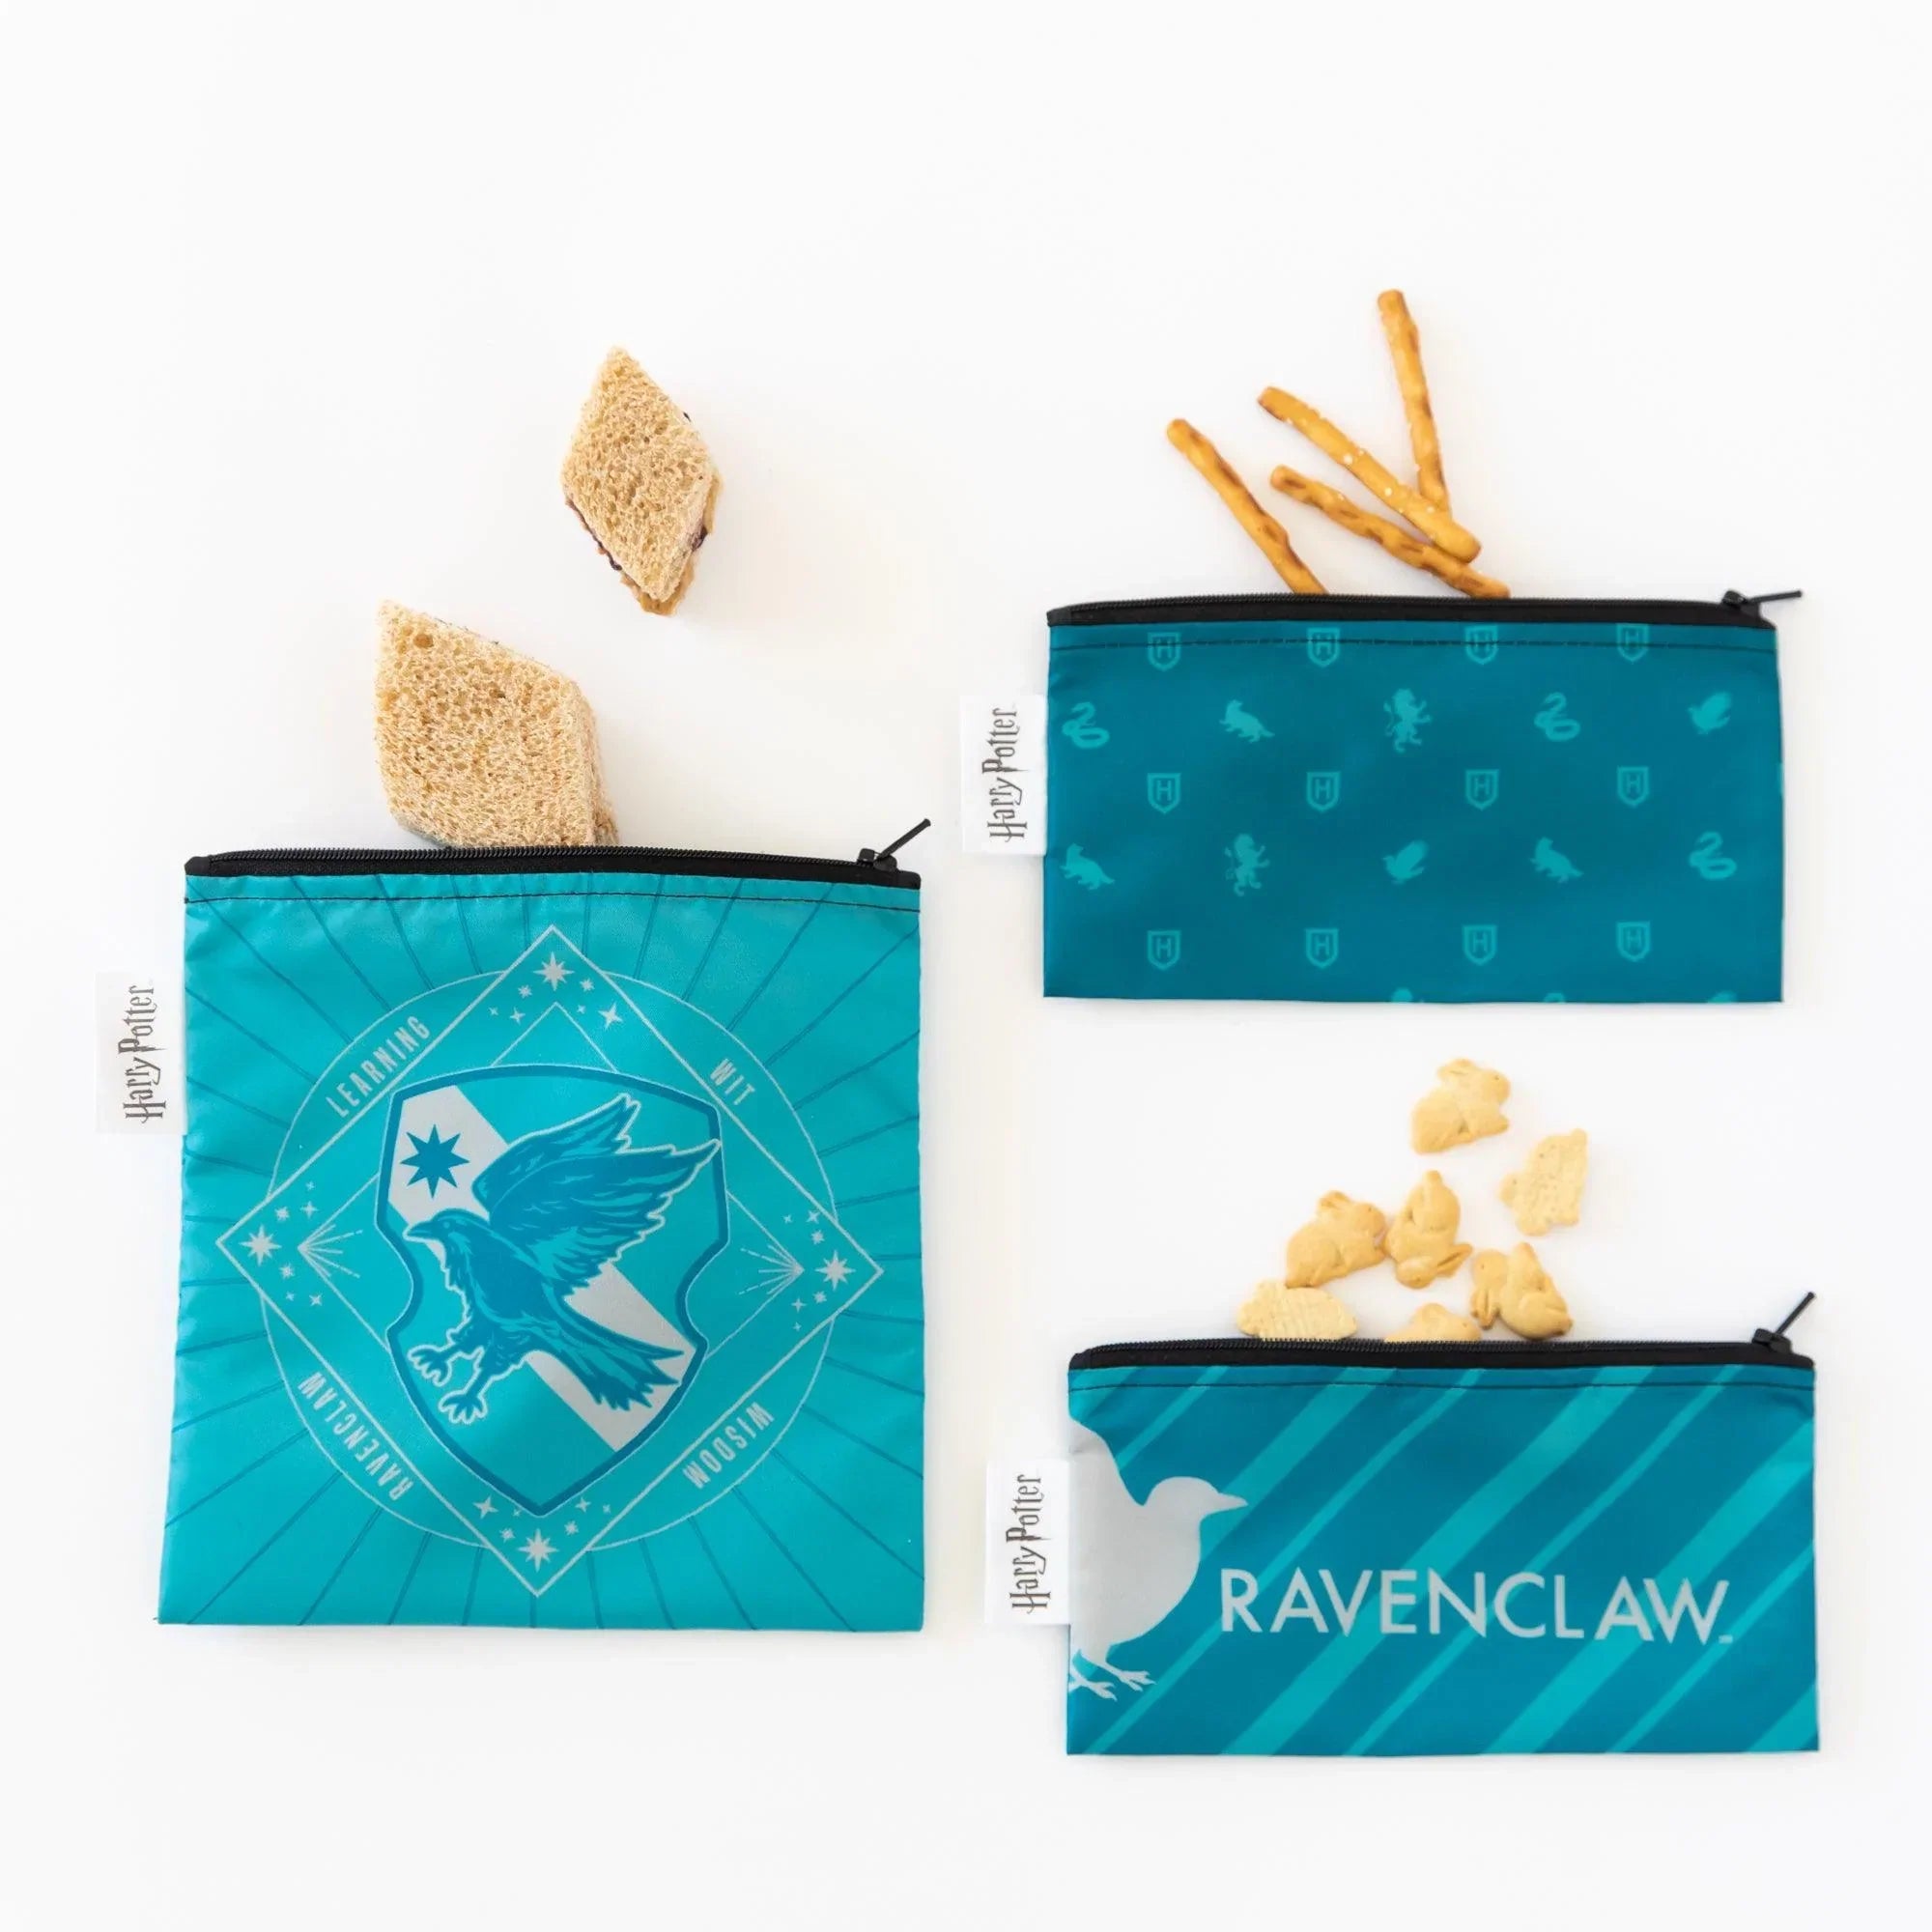 Ravenclaw Harry Potter Reusable Snack Bags